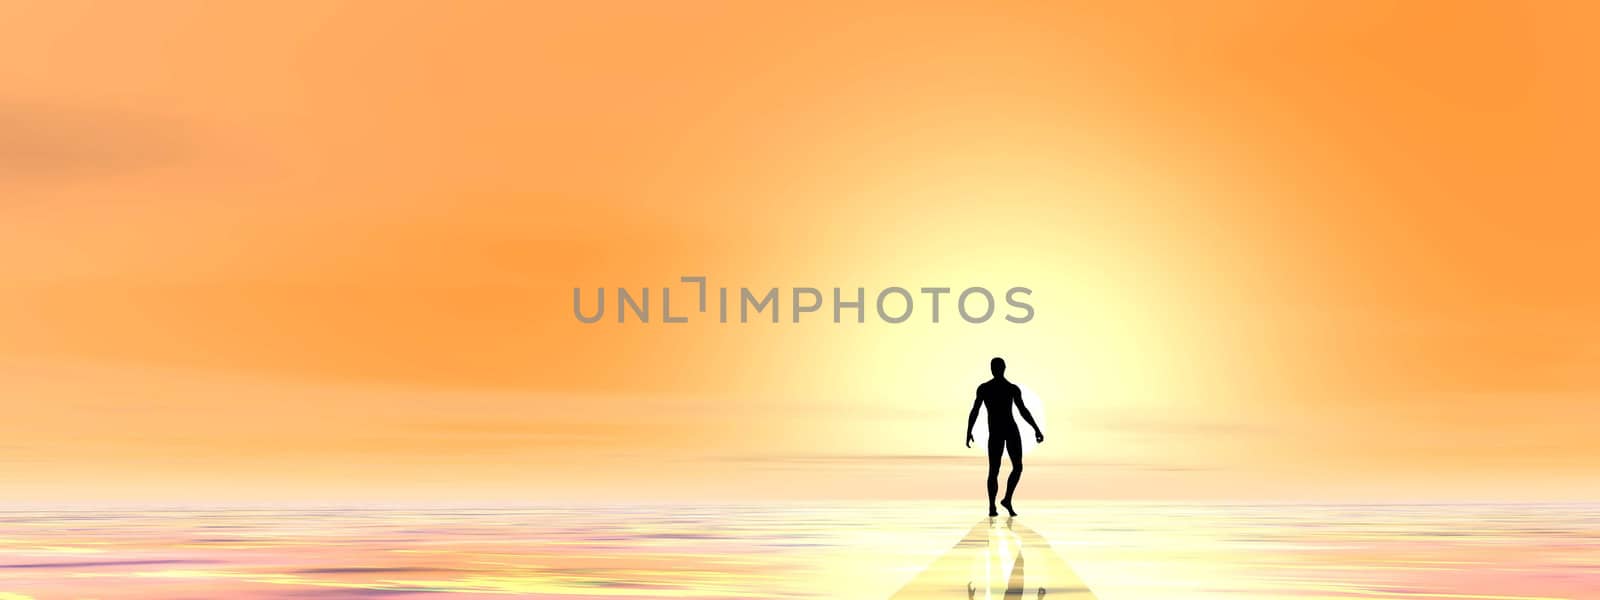 Small silhouette of a man walking to the yellow light in orange background